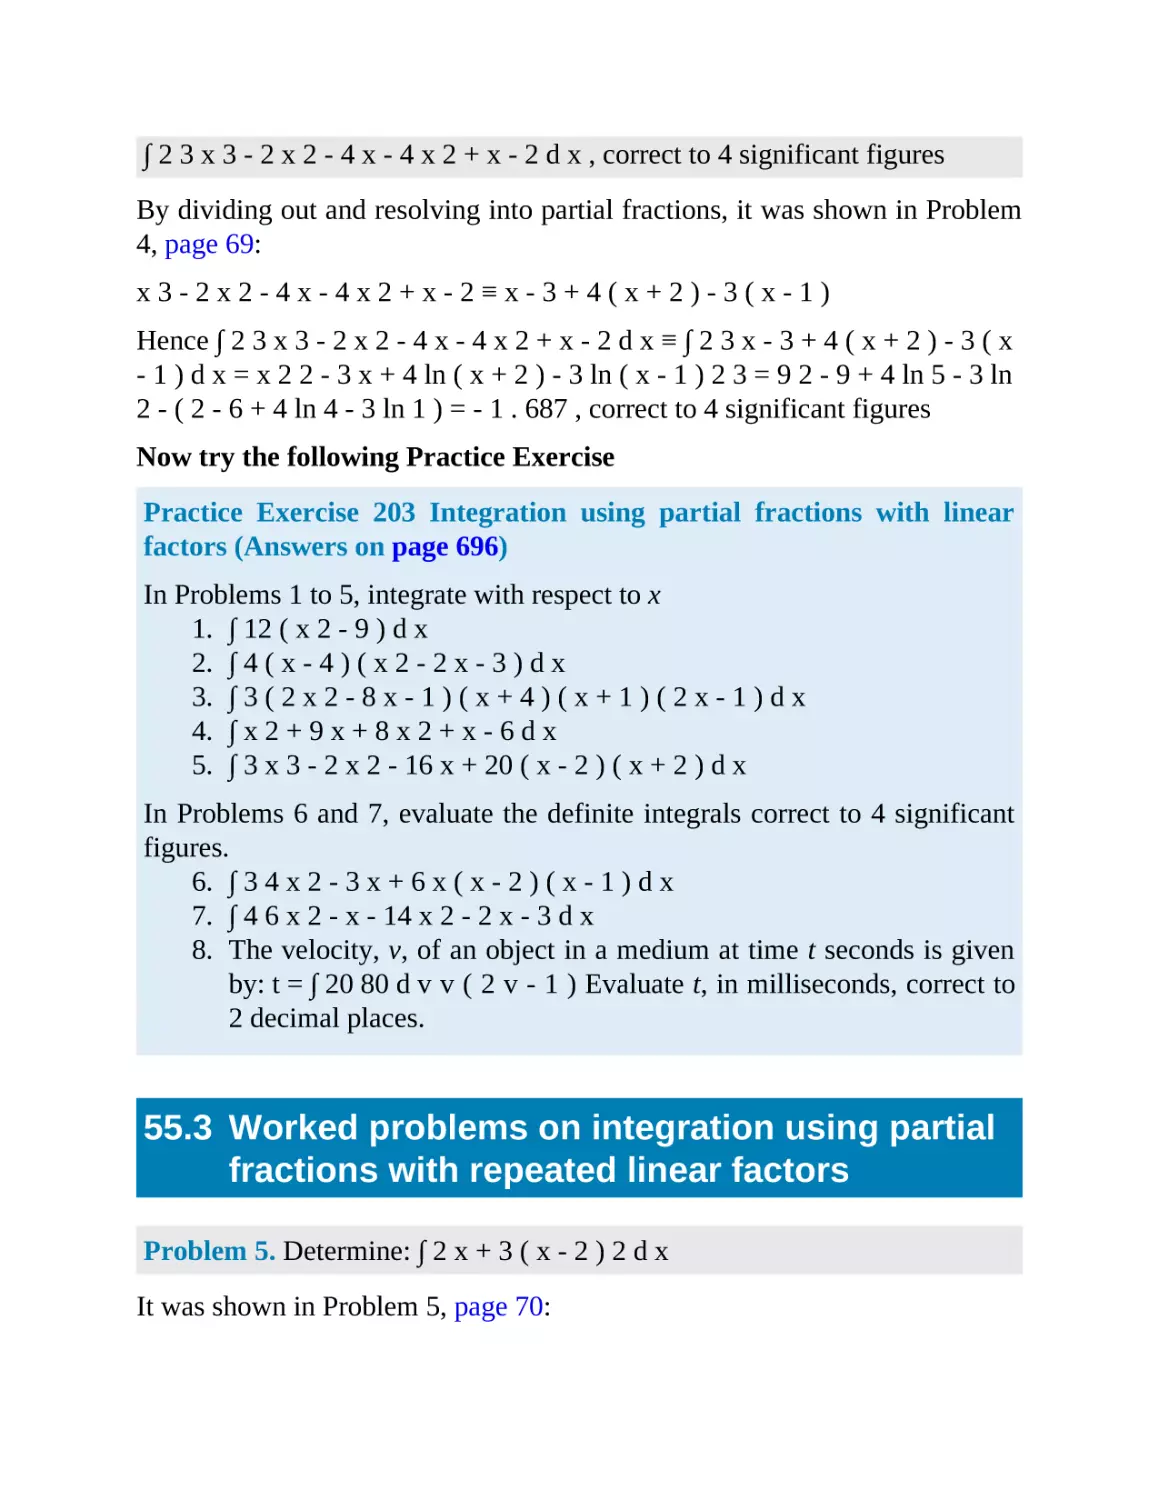 55.3 Worked problems on integration using partial fractions with repeated linear factors